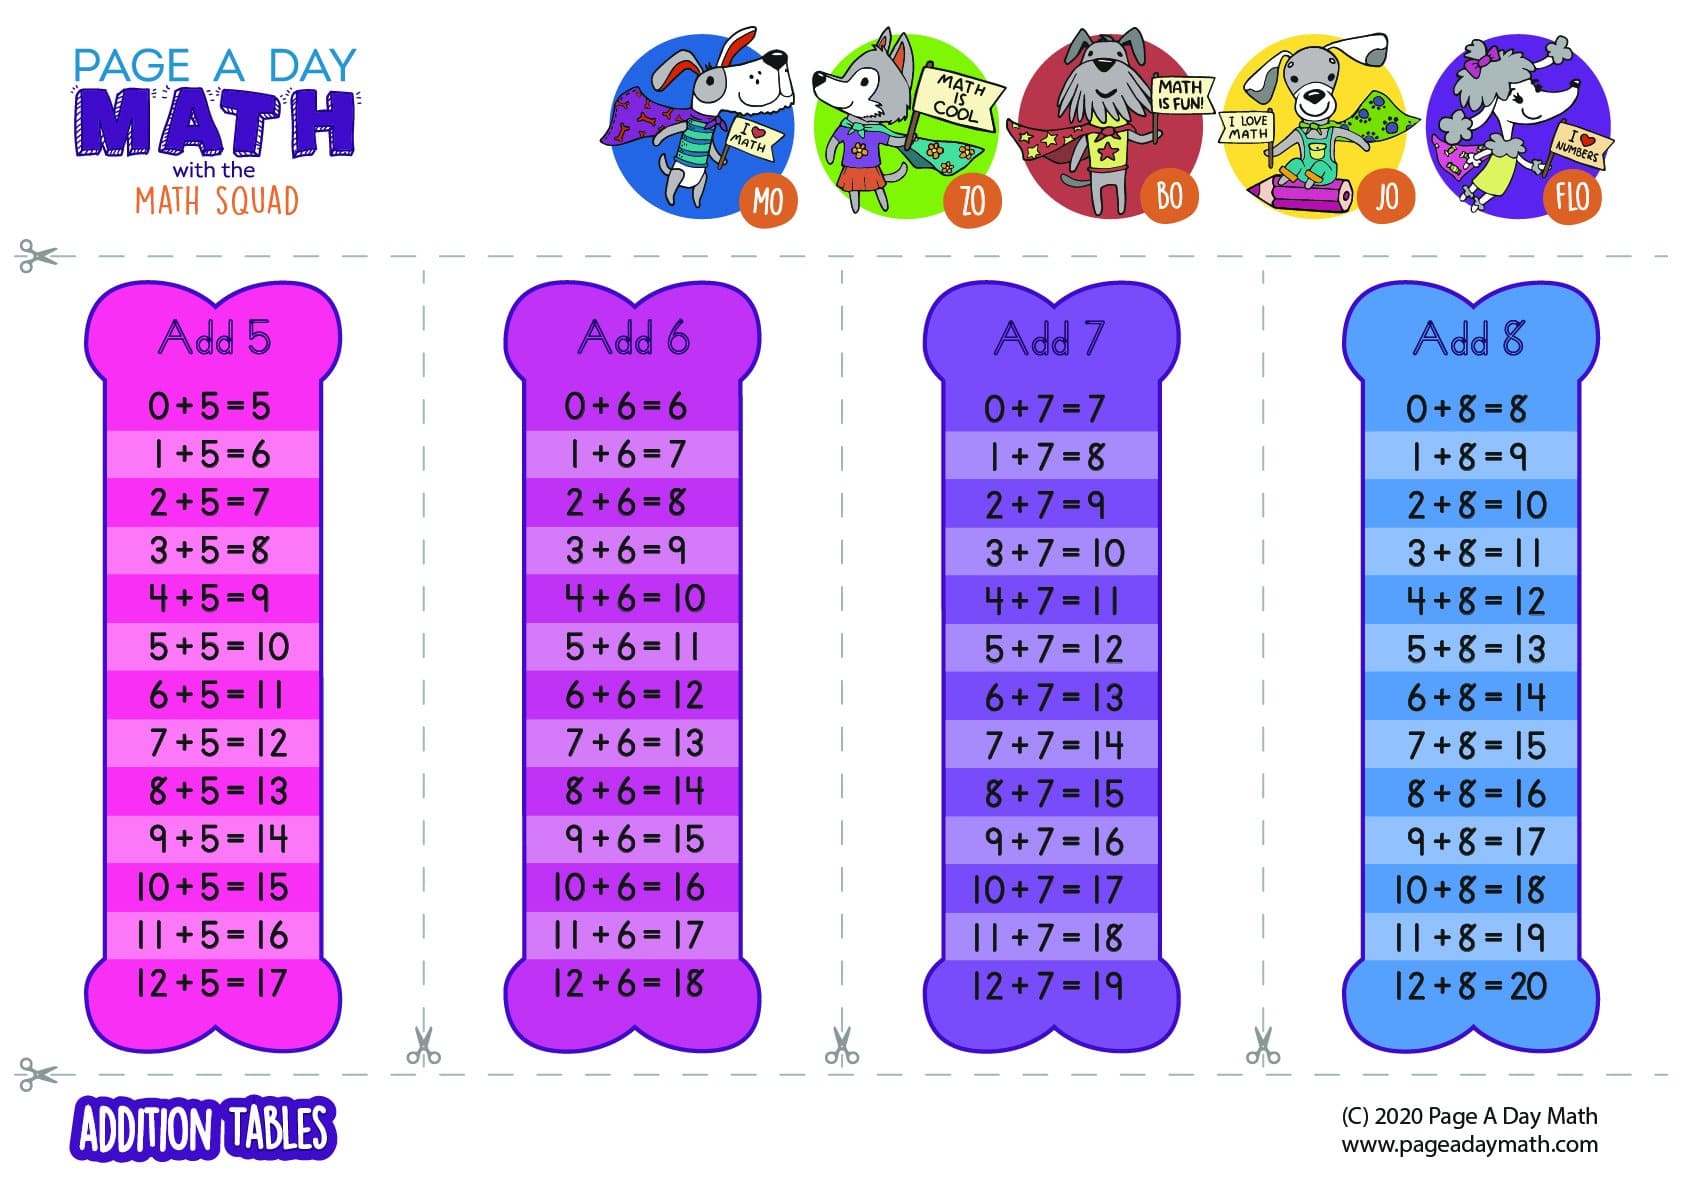 Color by Numbers for Kids Ages 8-12: Fun Coloring by Number Activity Book for 8, 9, 10, 11 and 12 Year Old Children | Ages 8-10, 10-12